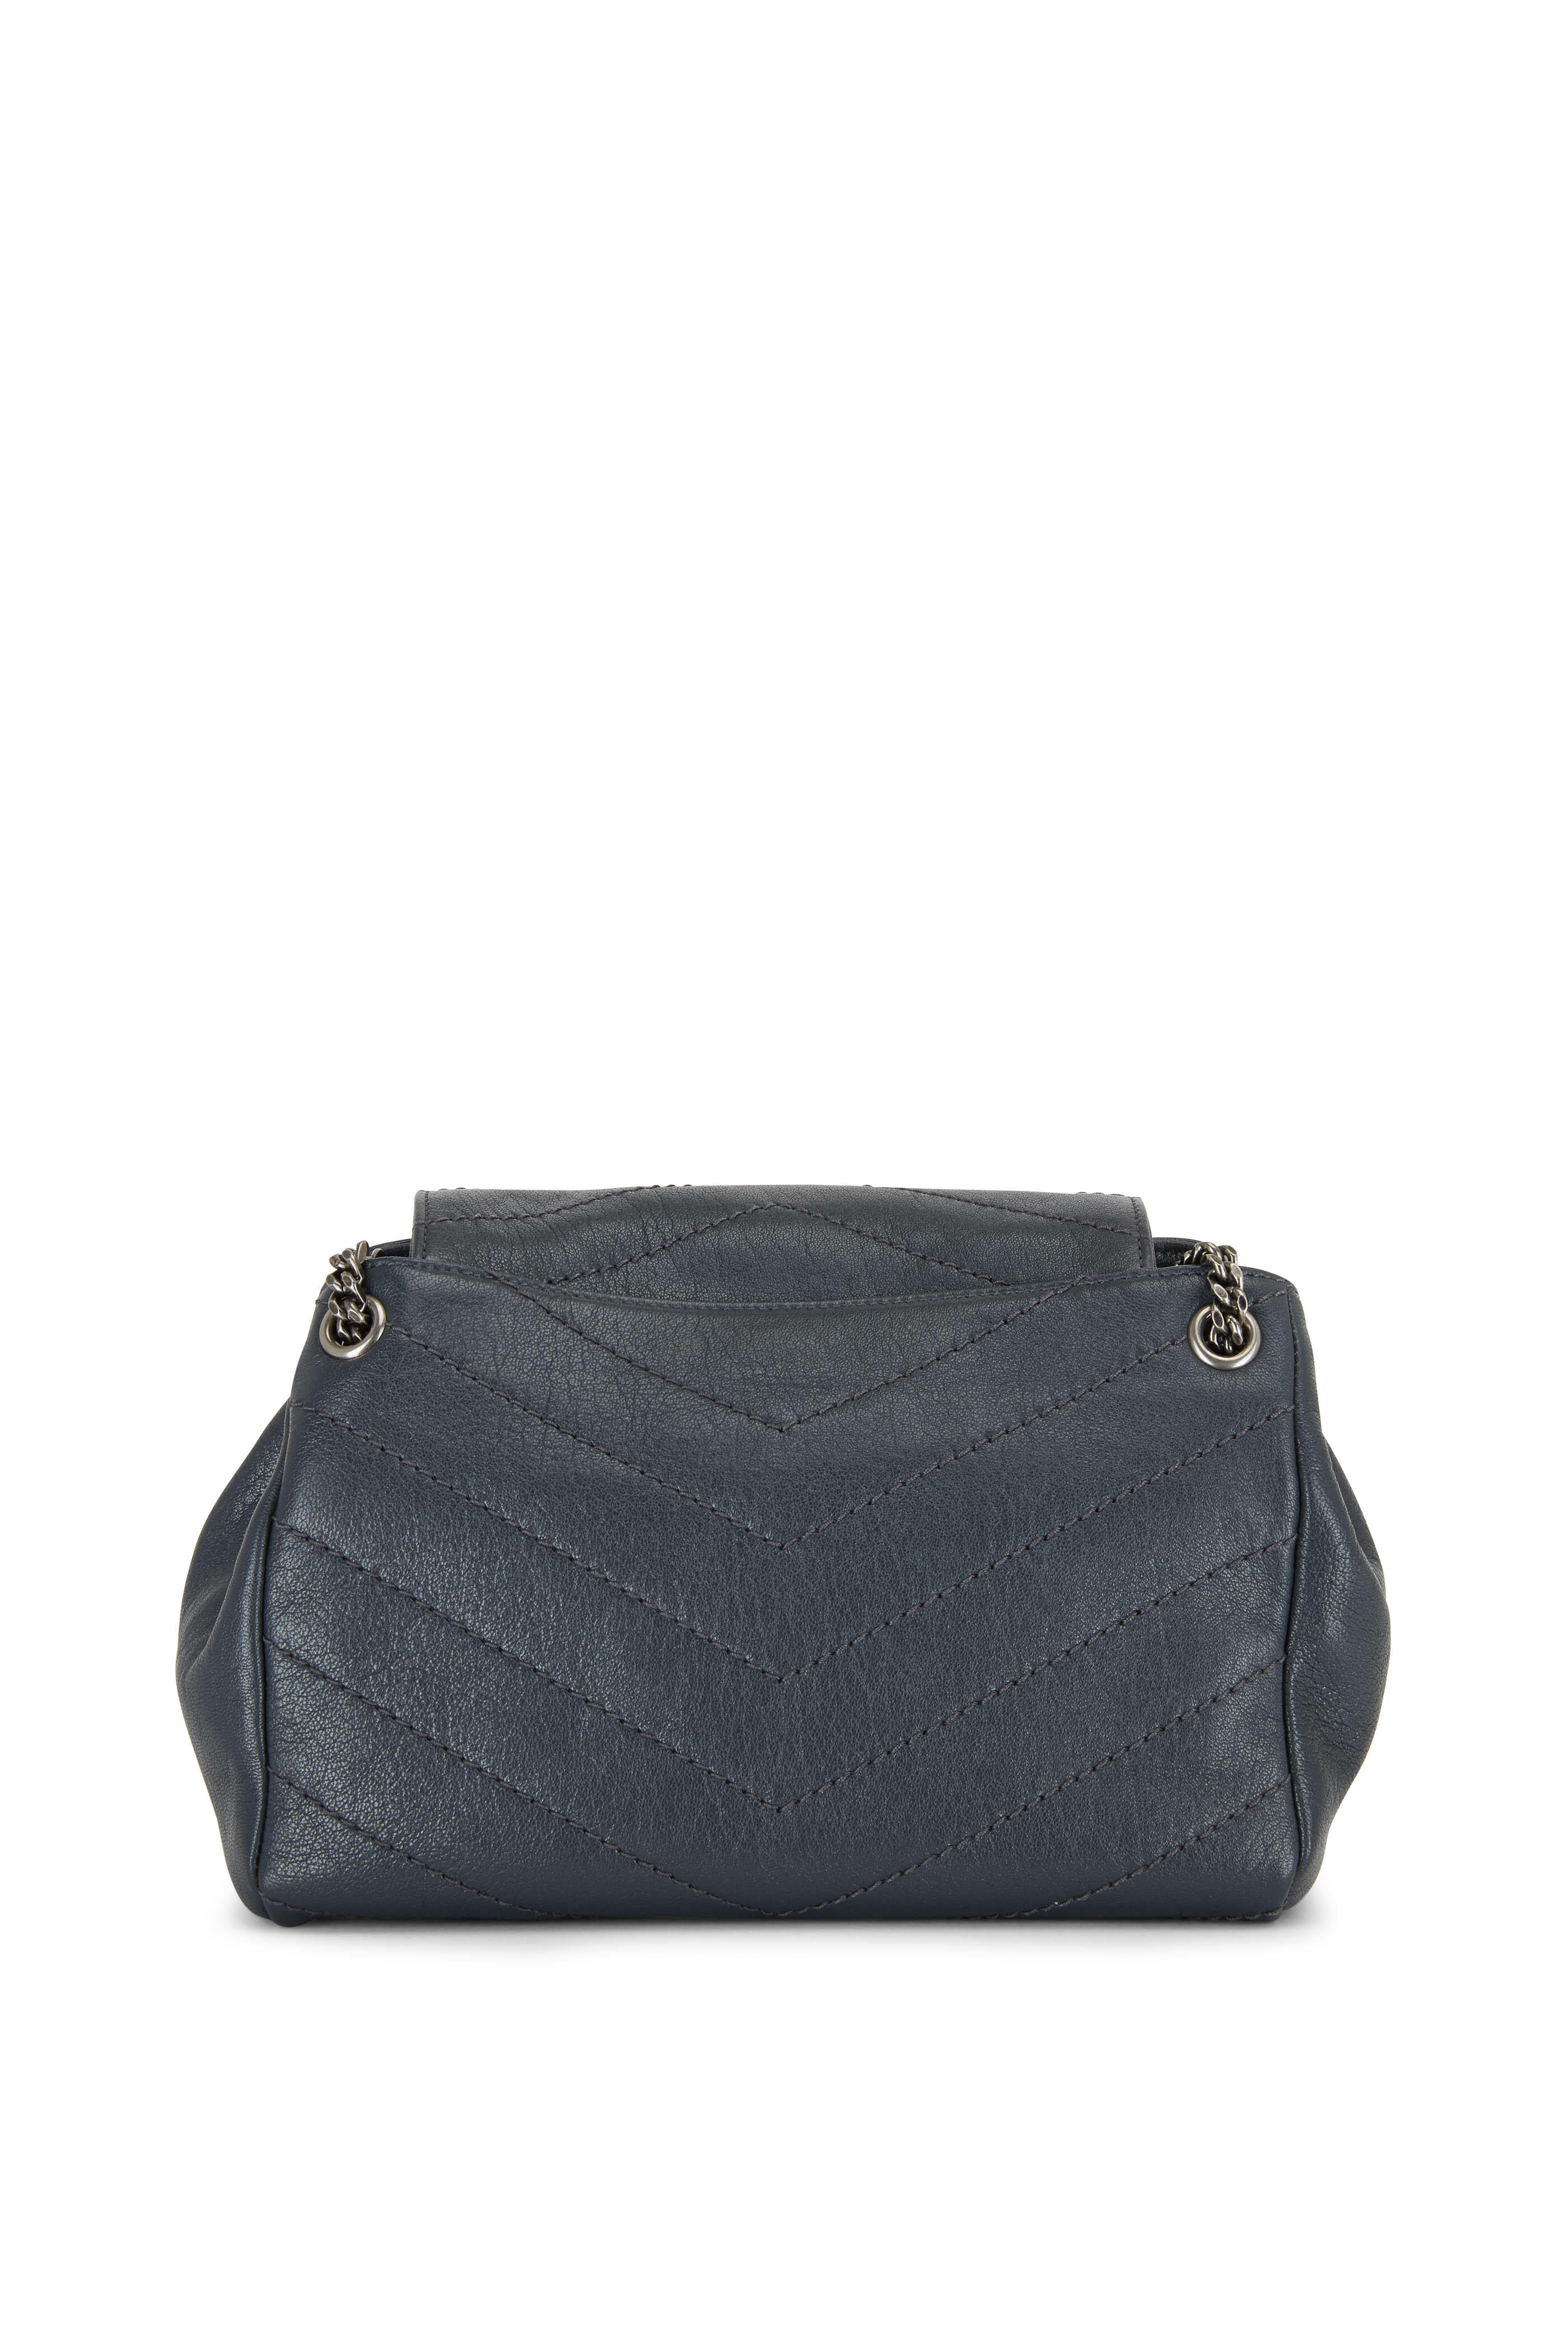 REAL VS FAKE YSL PUFFER SMALL BAG IN QUILTED VINTAGE DENIM AND